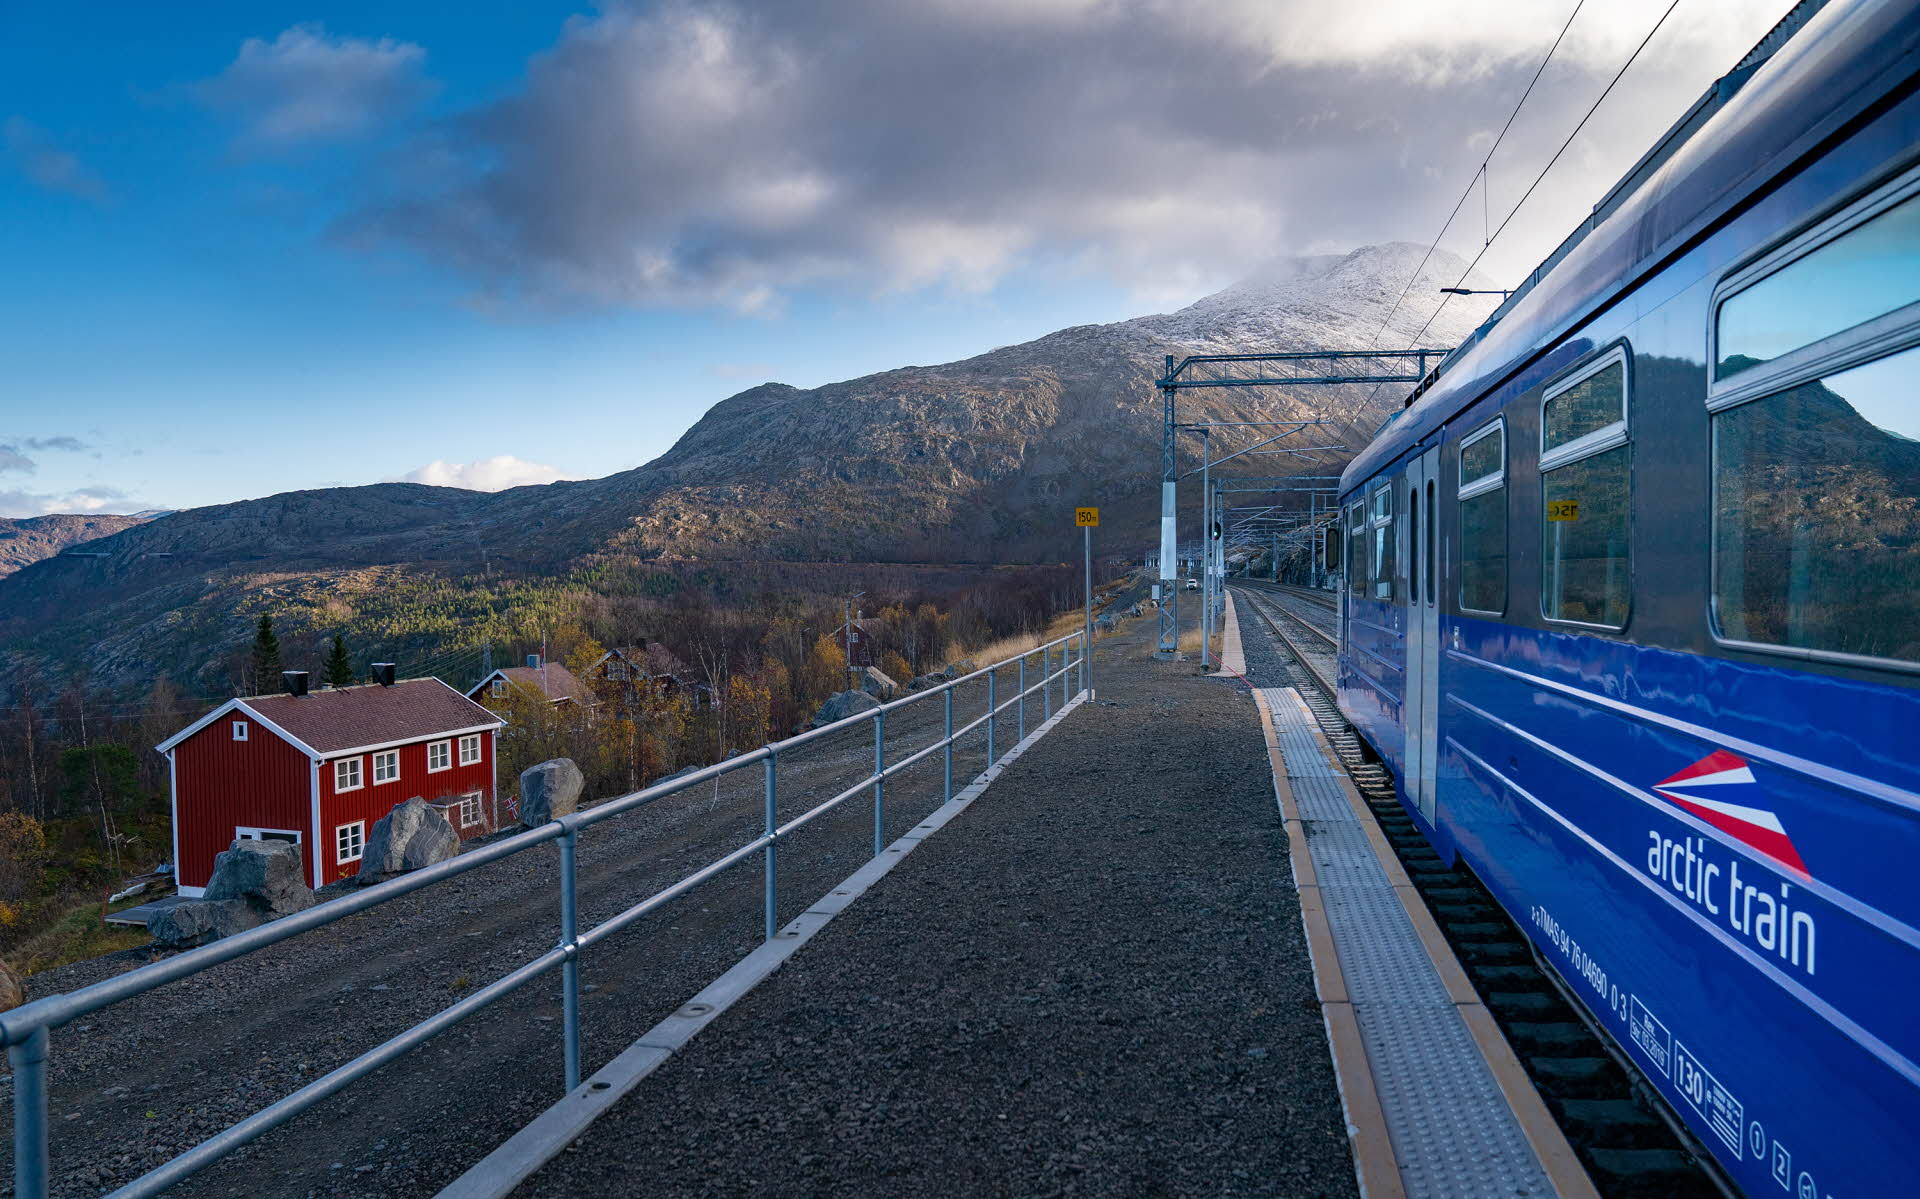 The Arctic Train by the platform at a station. A red building below and snow-capped mountains ahead.